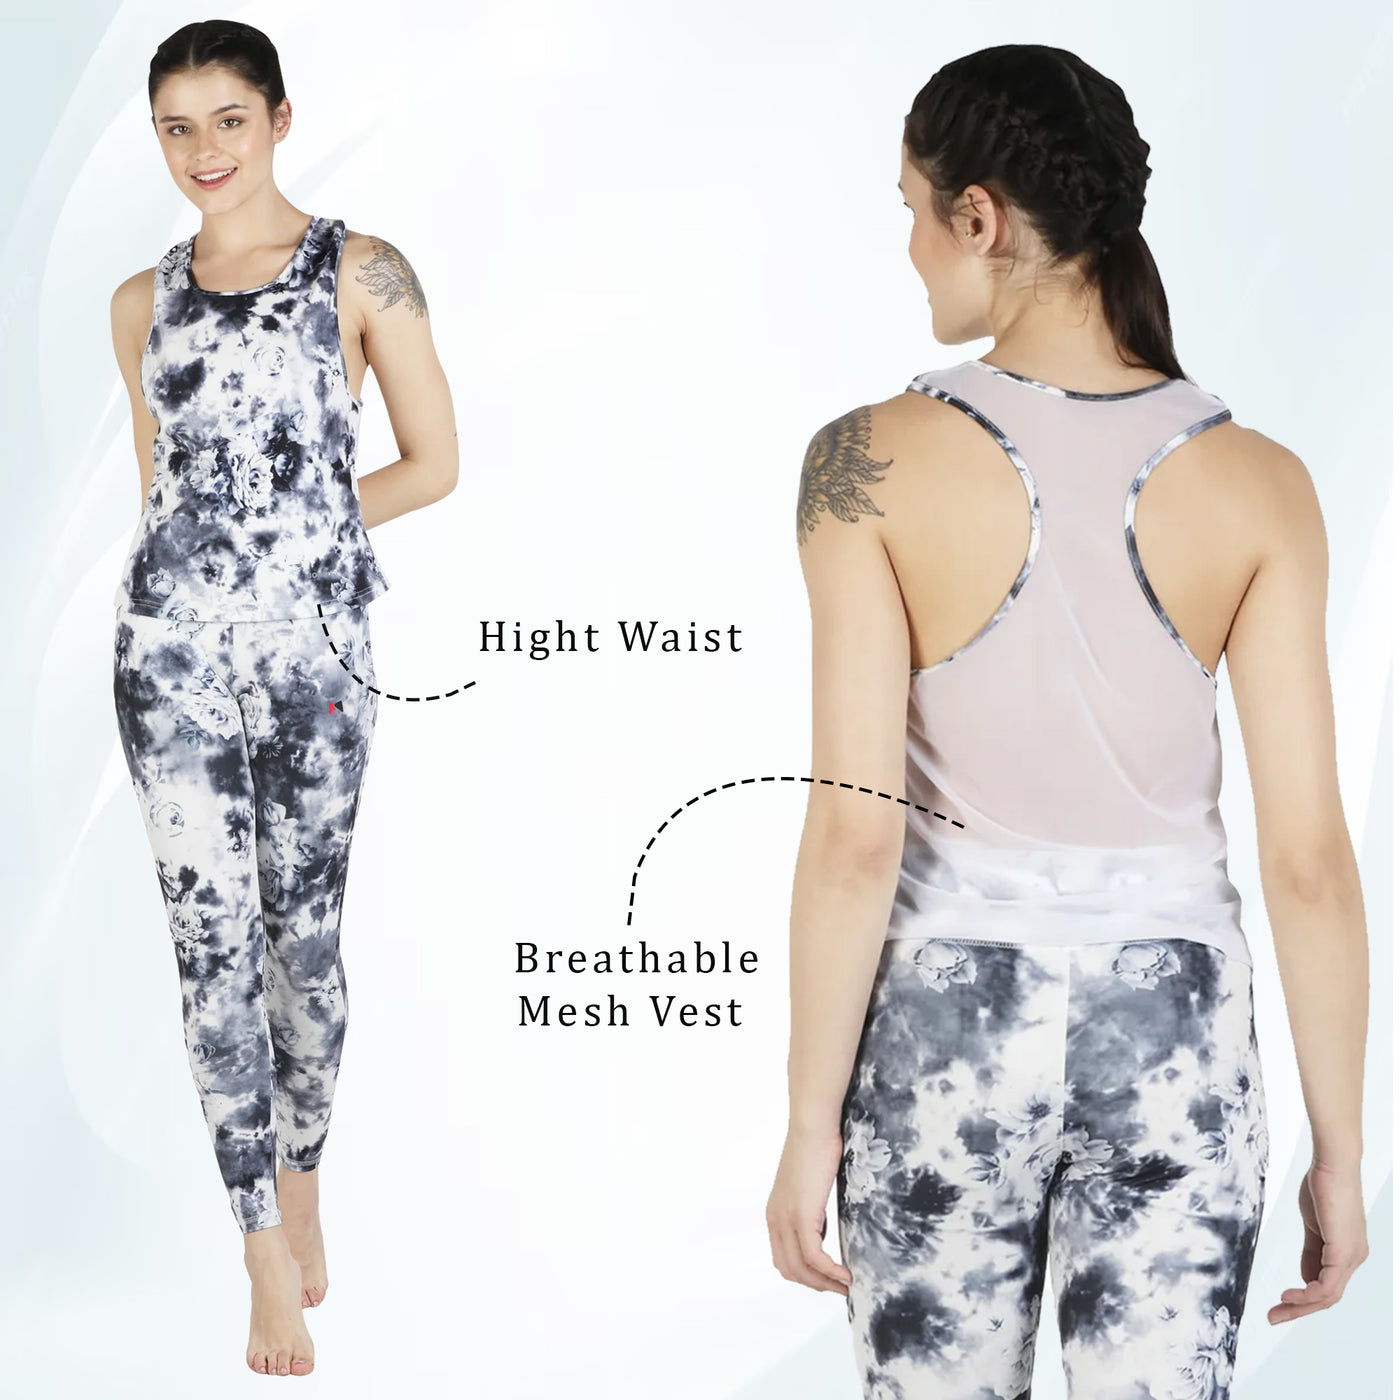 High Waist Tight With Breathable Mesh Vest - Black Printed